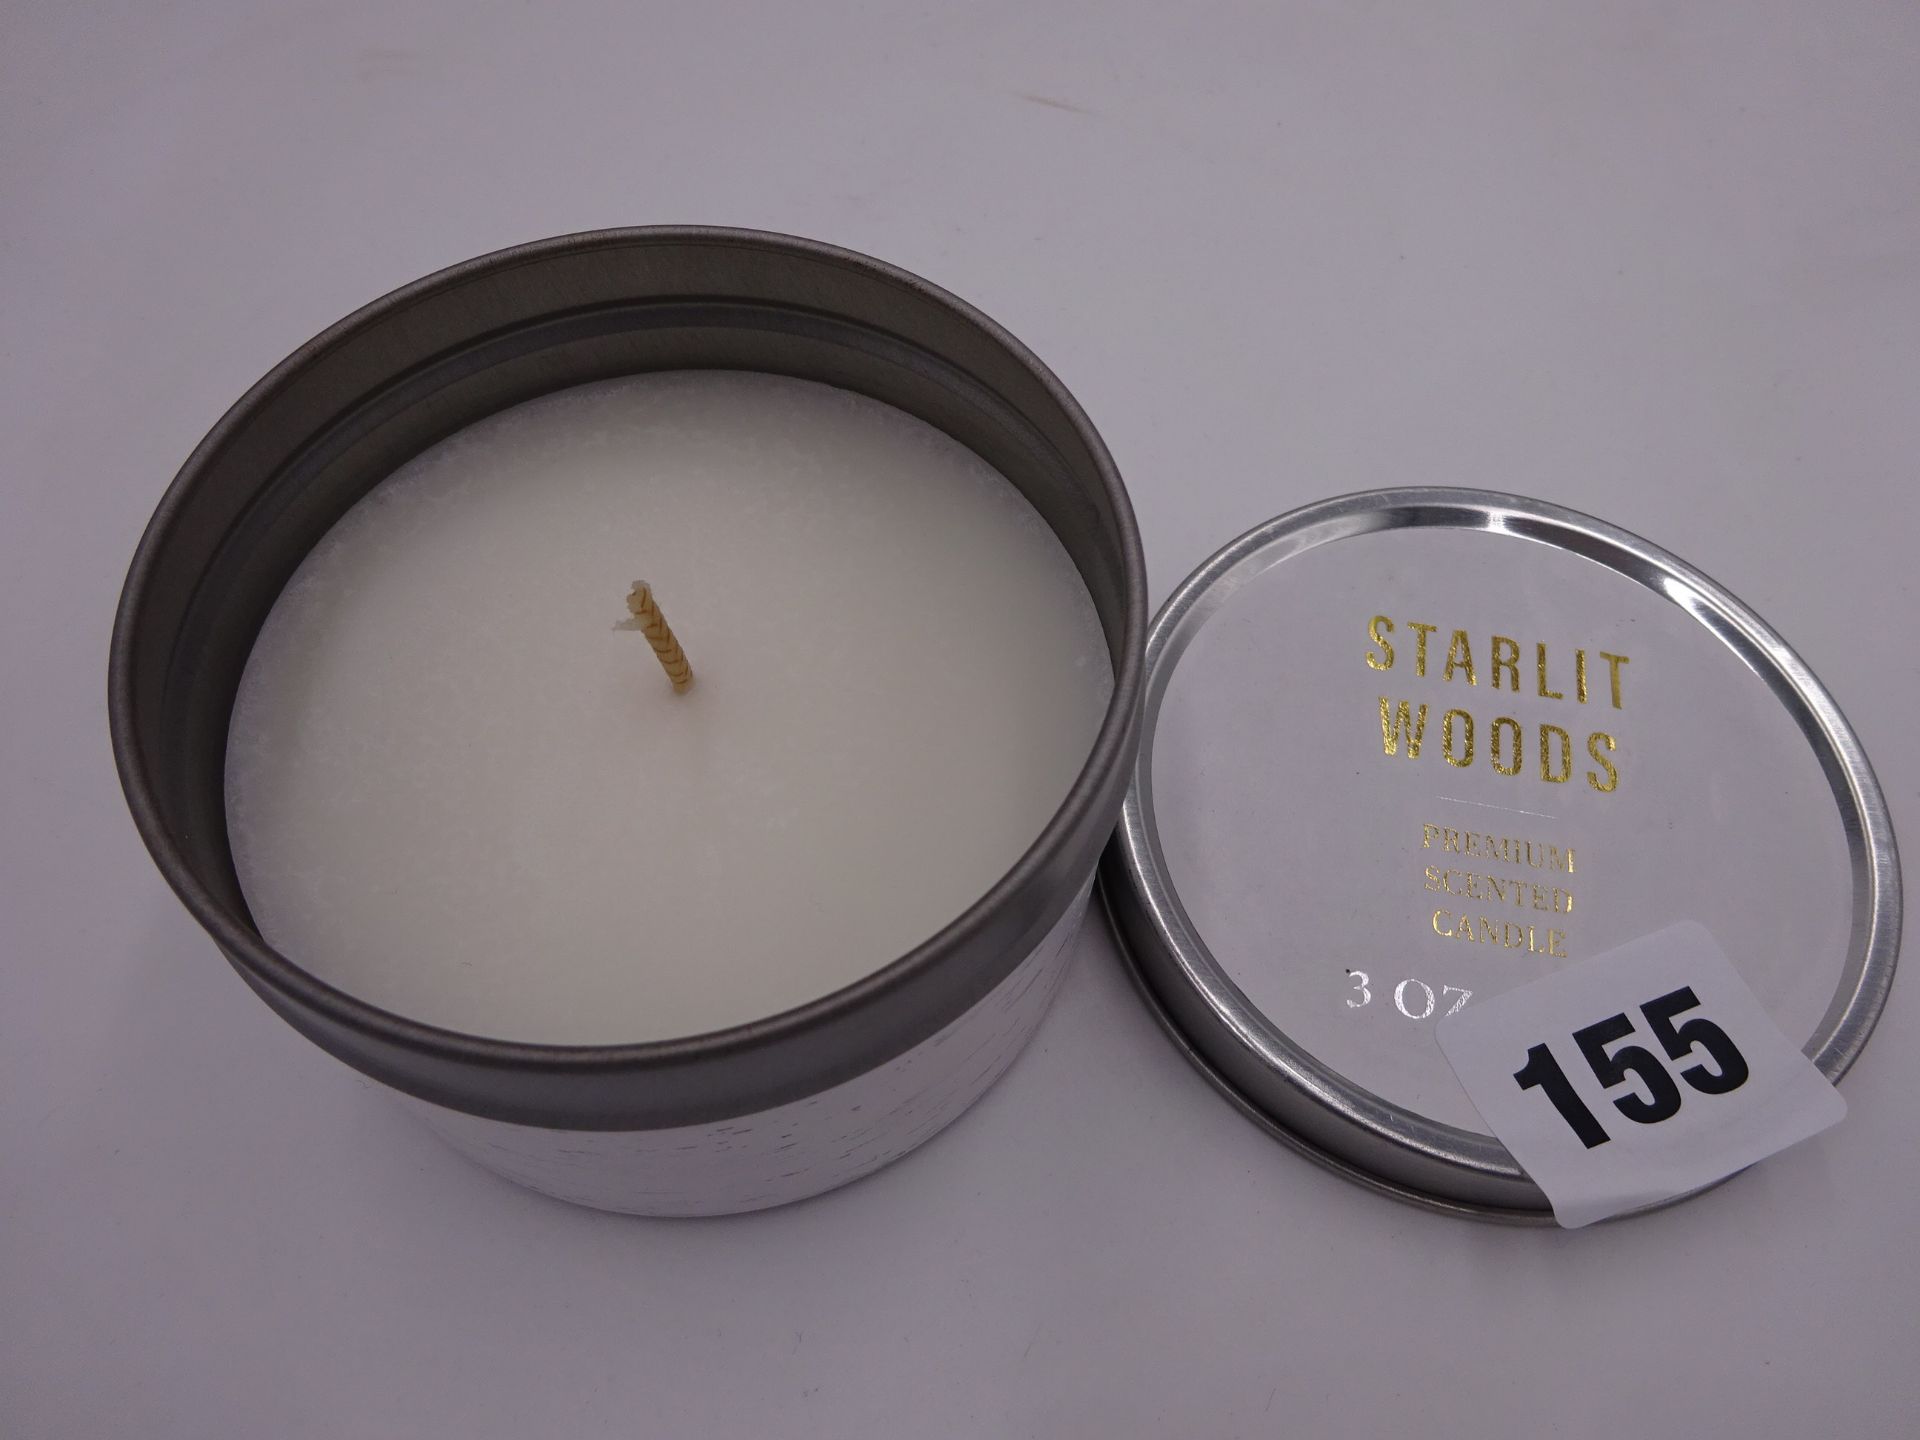 NEW STARLIT WOODS SCENTED CANDLE